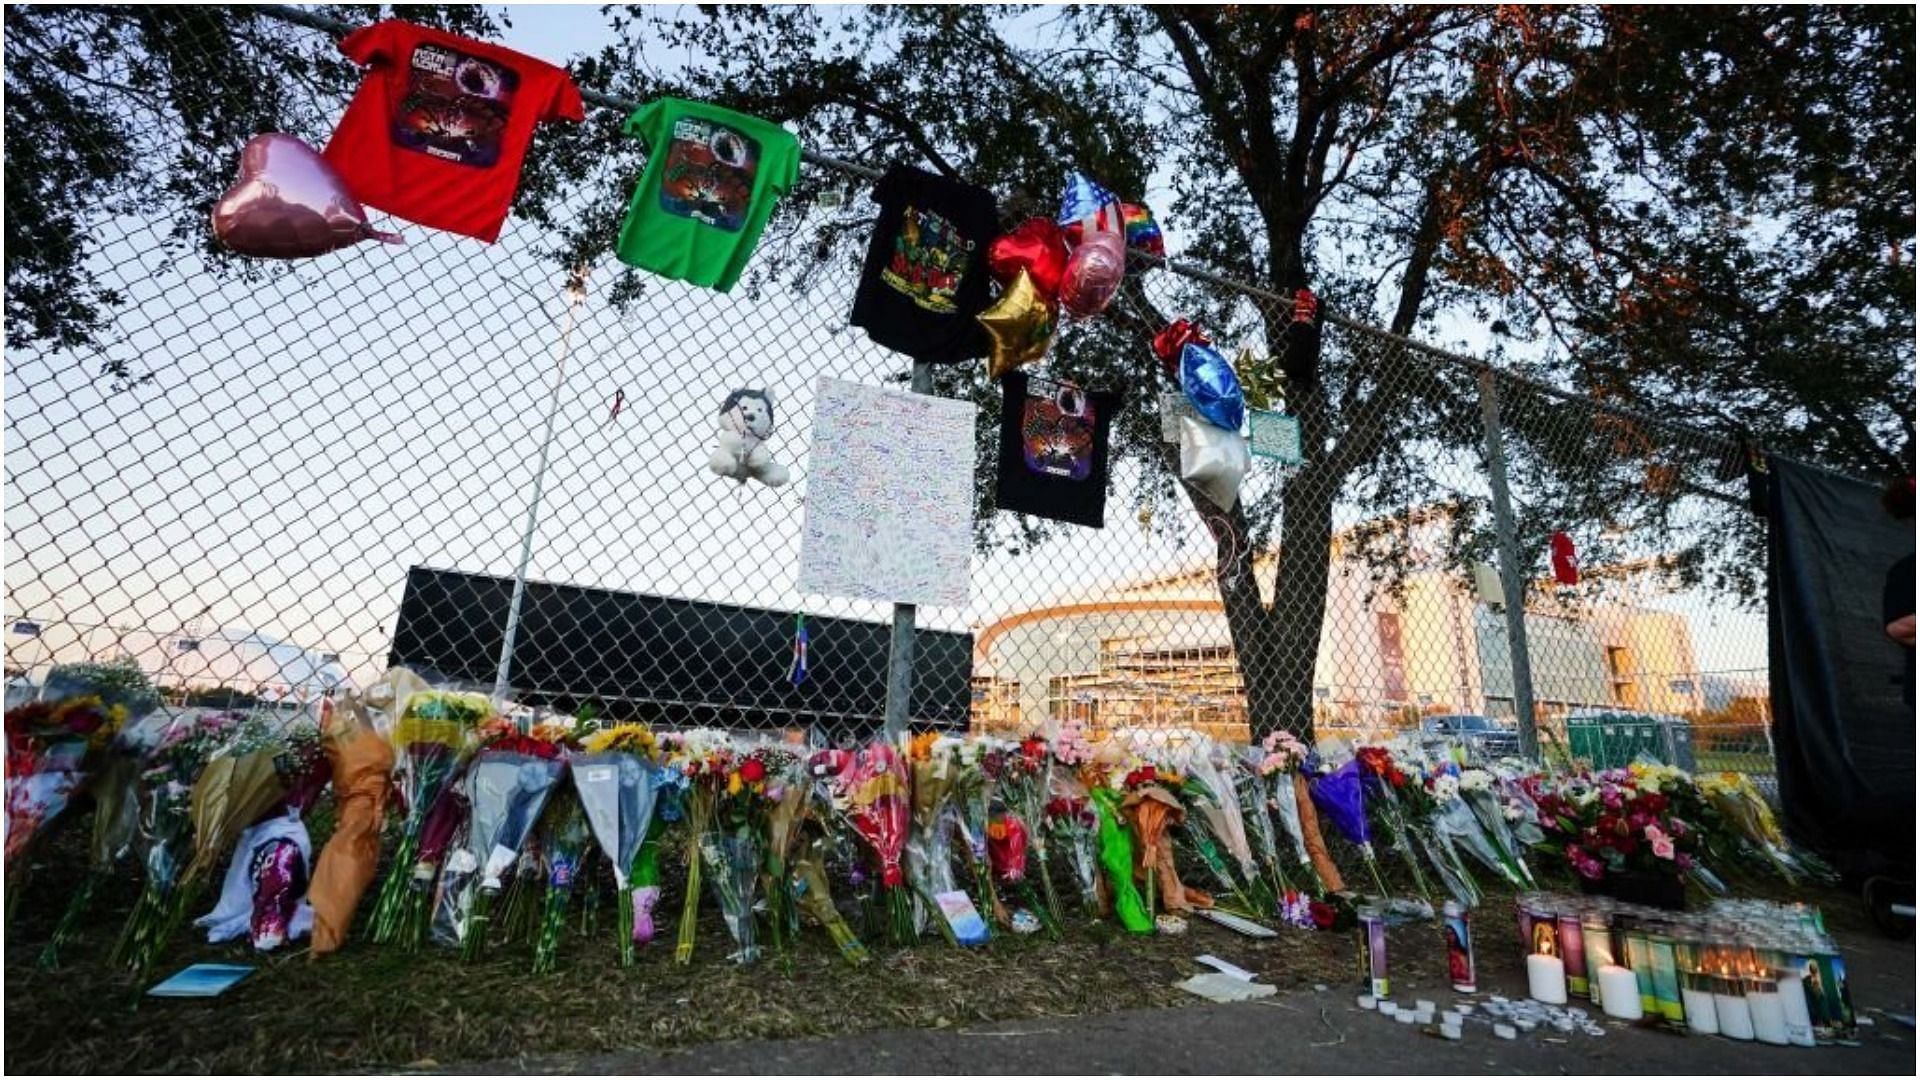 Candles, flowers and letters are placed at a memorial outside of the canceled Astroworld festival at NRG Park (Image via Alex Bierens de Haan/Getty Images)